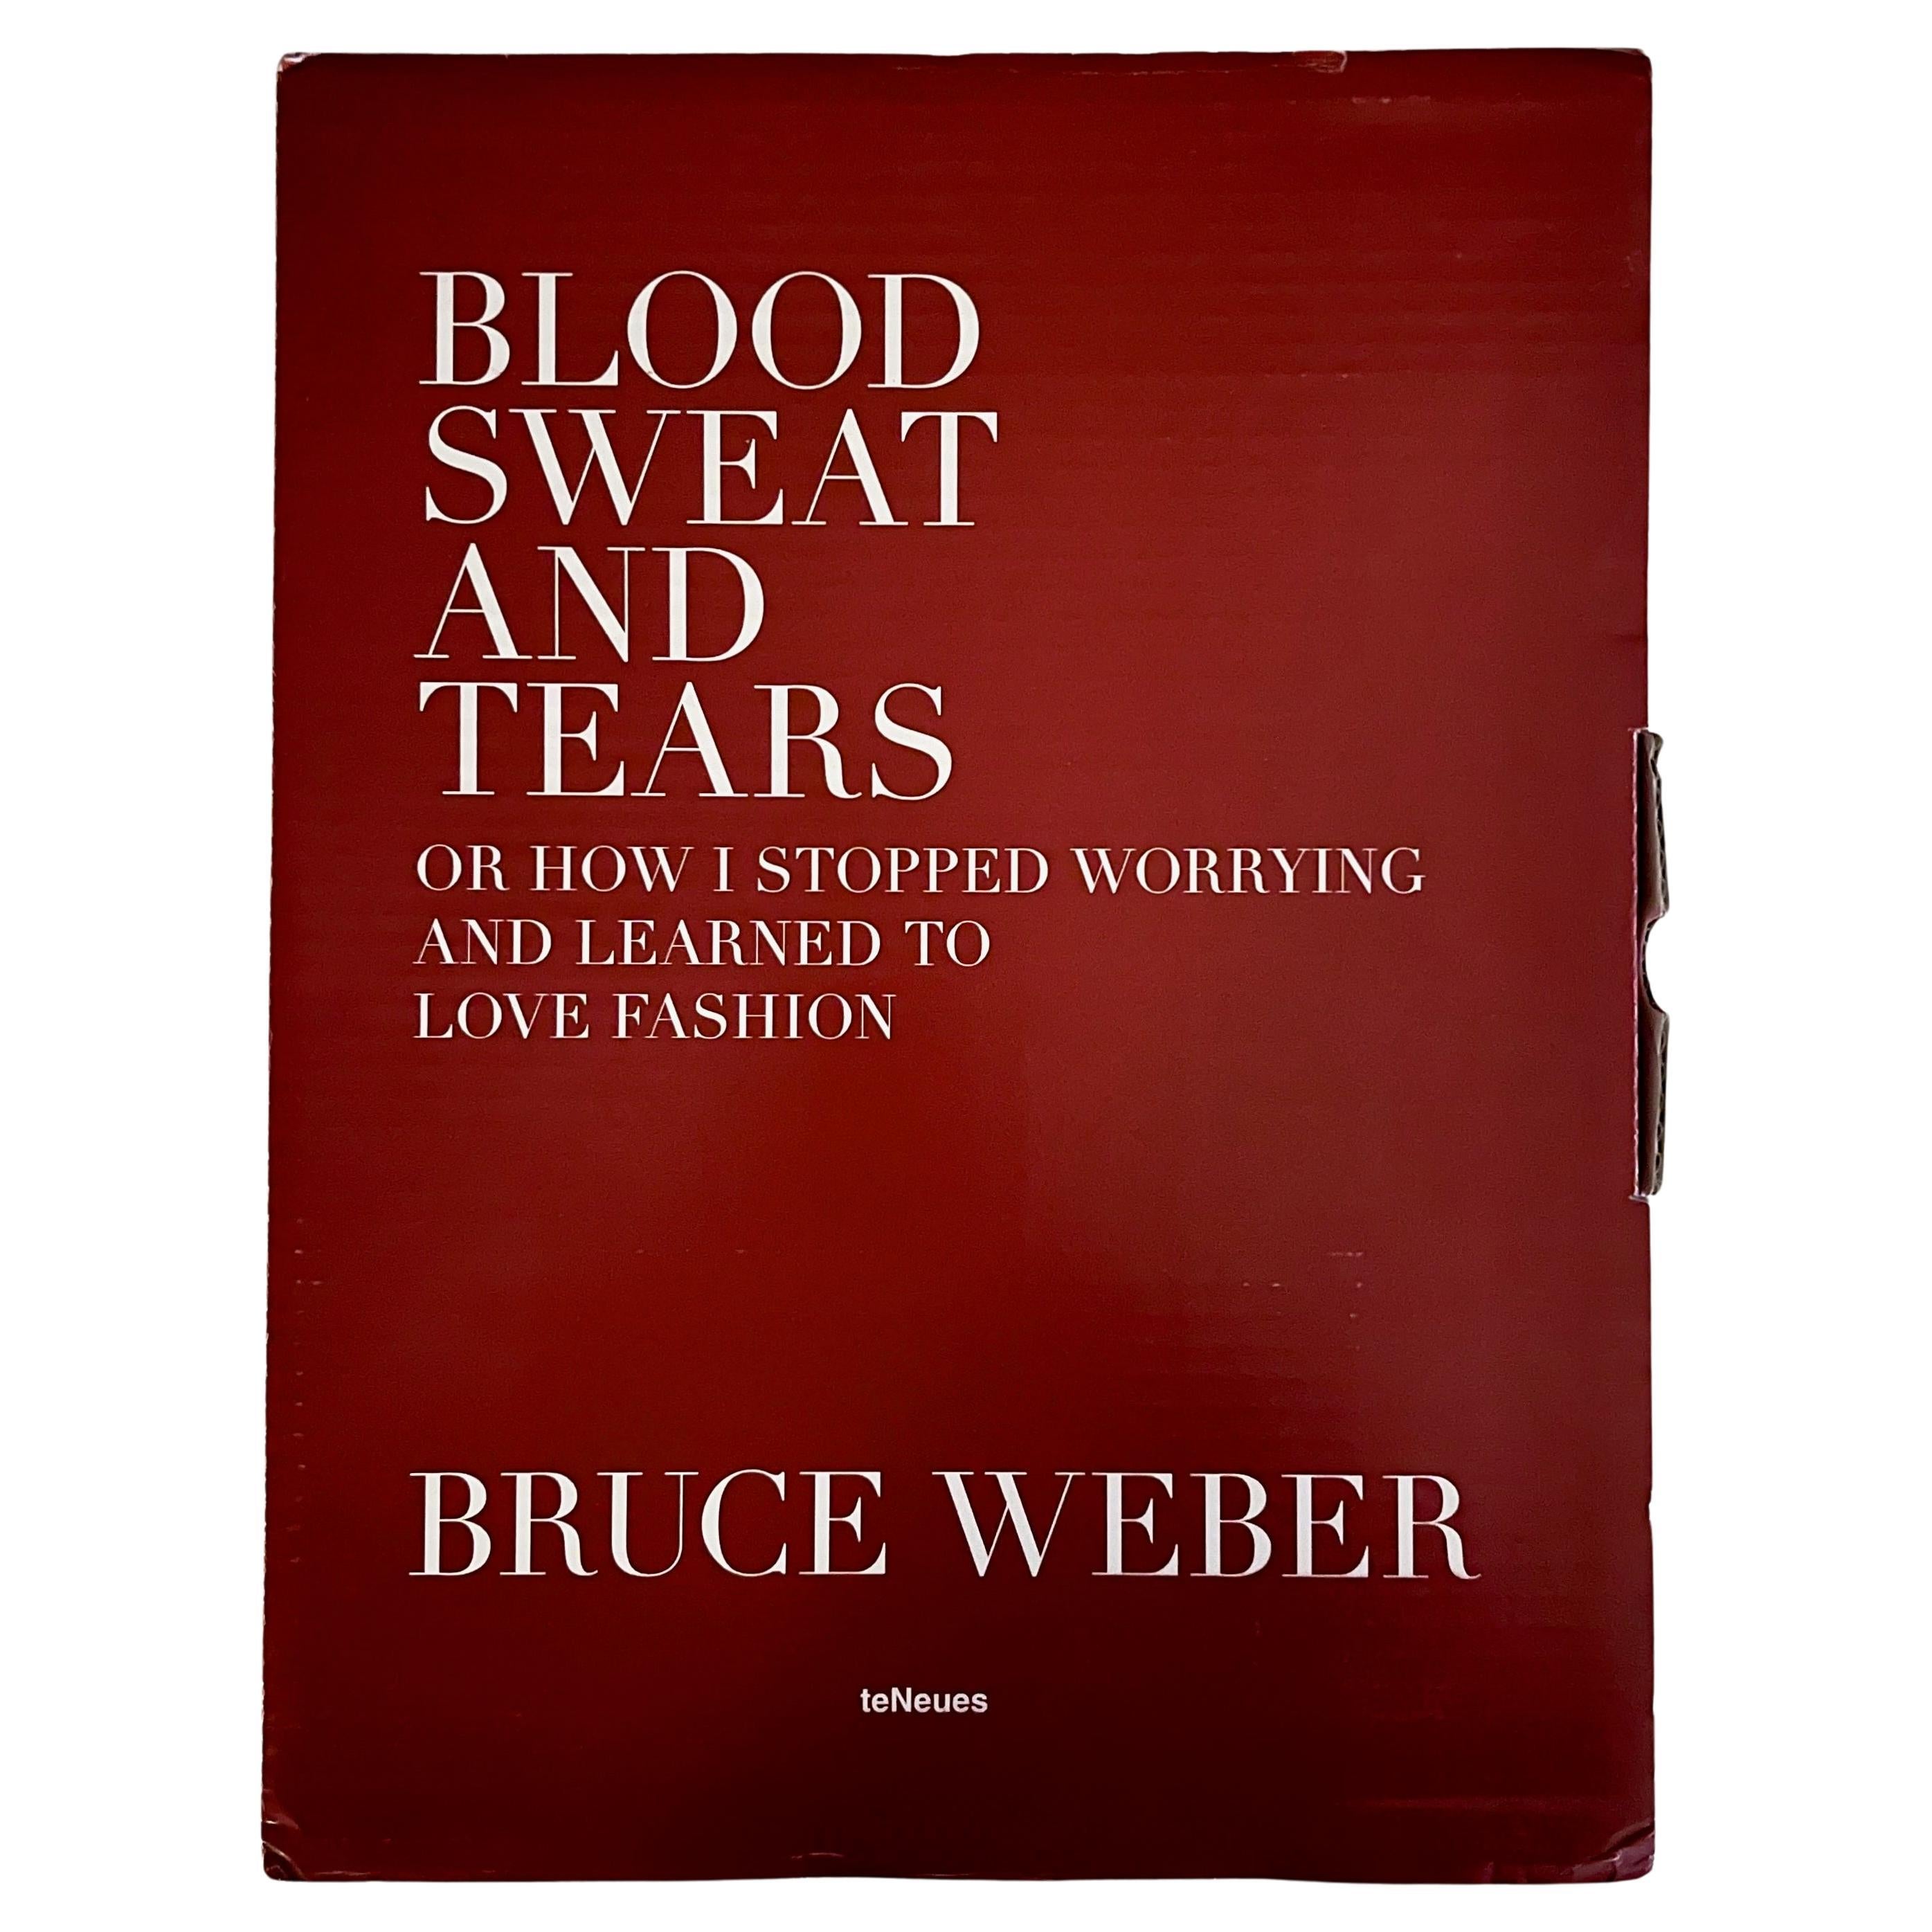 Blood Sweat and Tears - Bruce Weber - Signed & Numbered 1st, teNeues, 2005